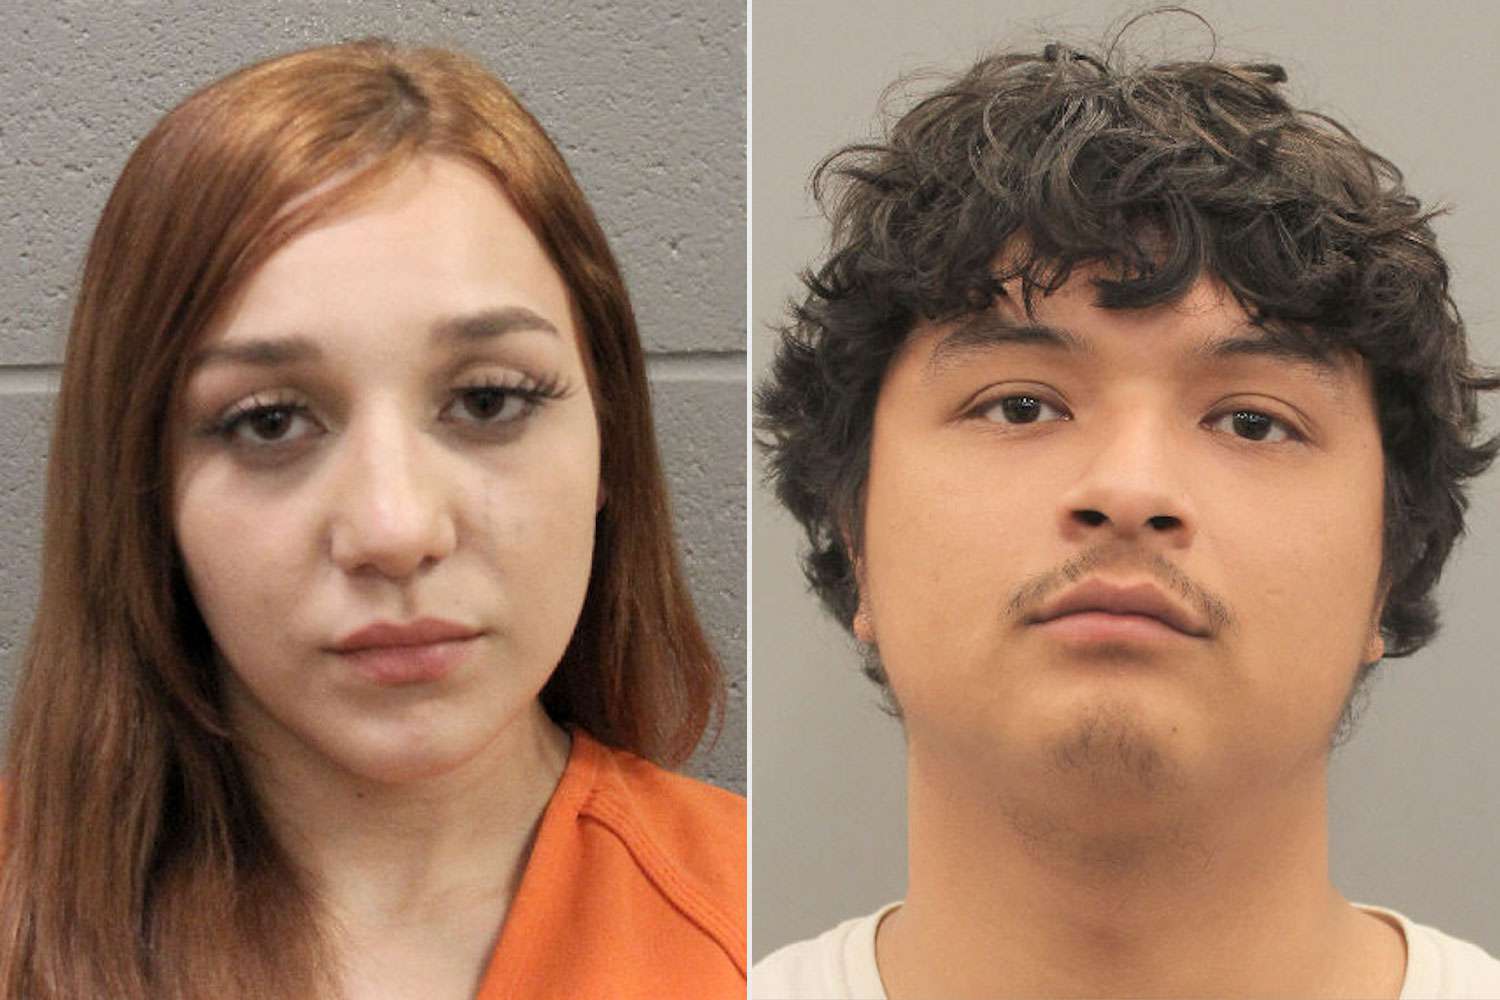 Twin 6-Week-Old Babies Were Found Dead in Their Cribs Last October. Why Were Their Parents Just Charged?